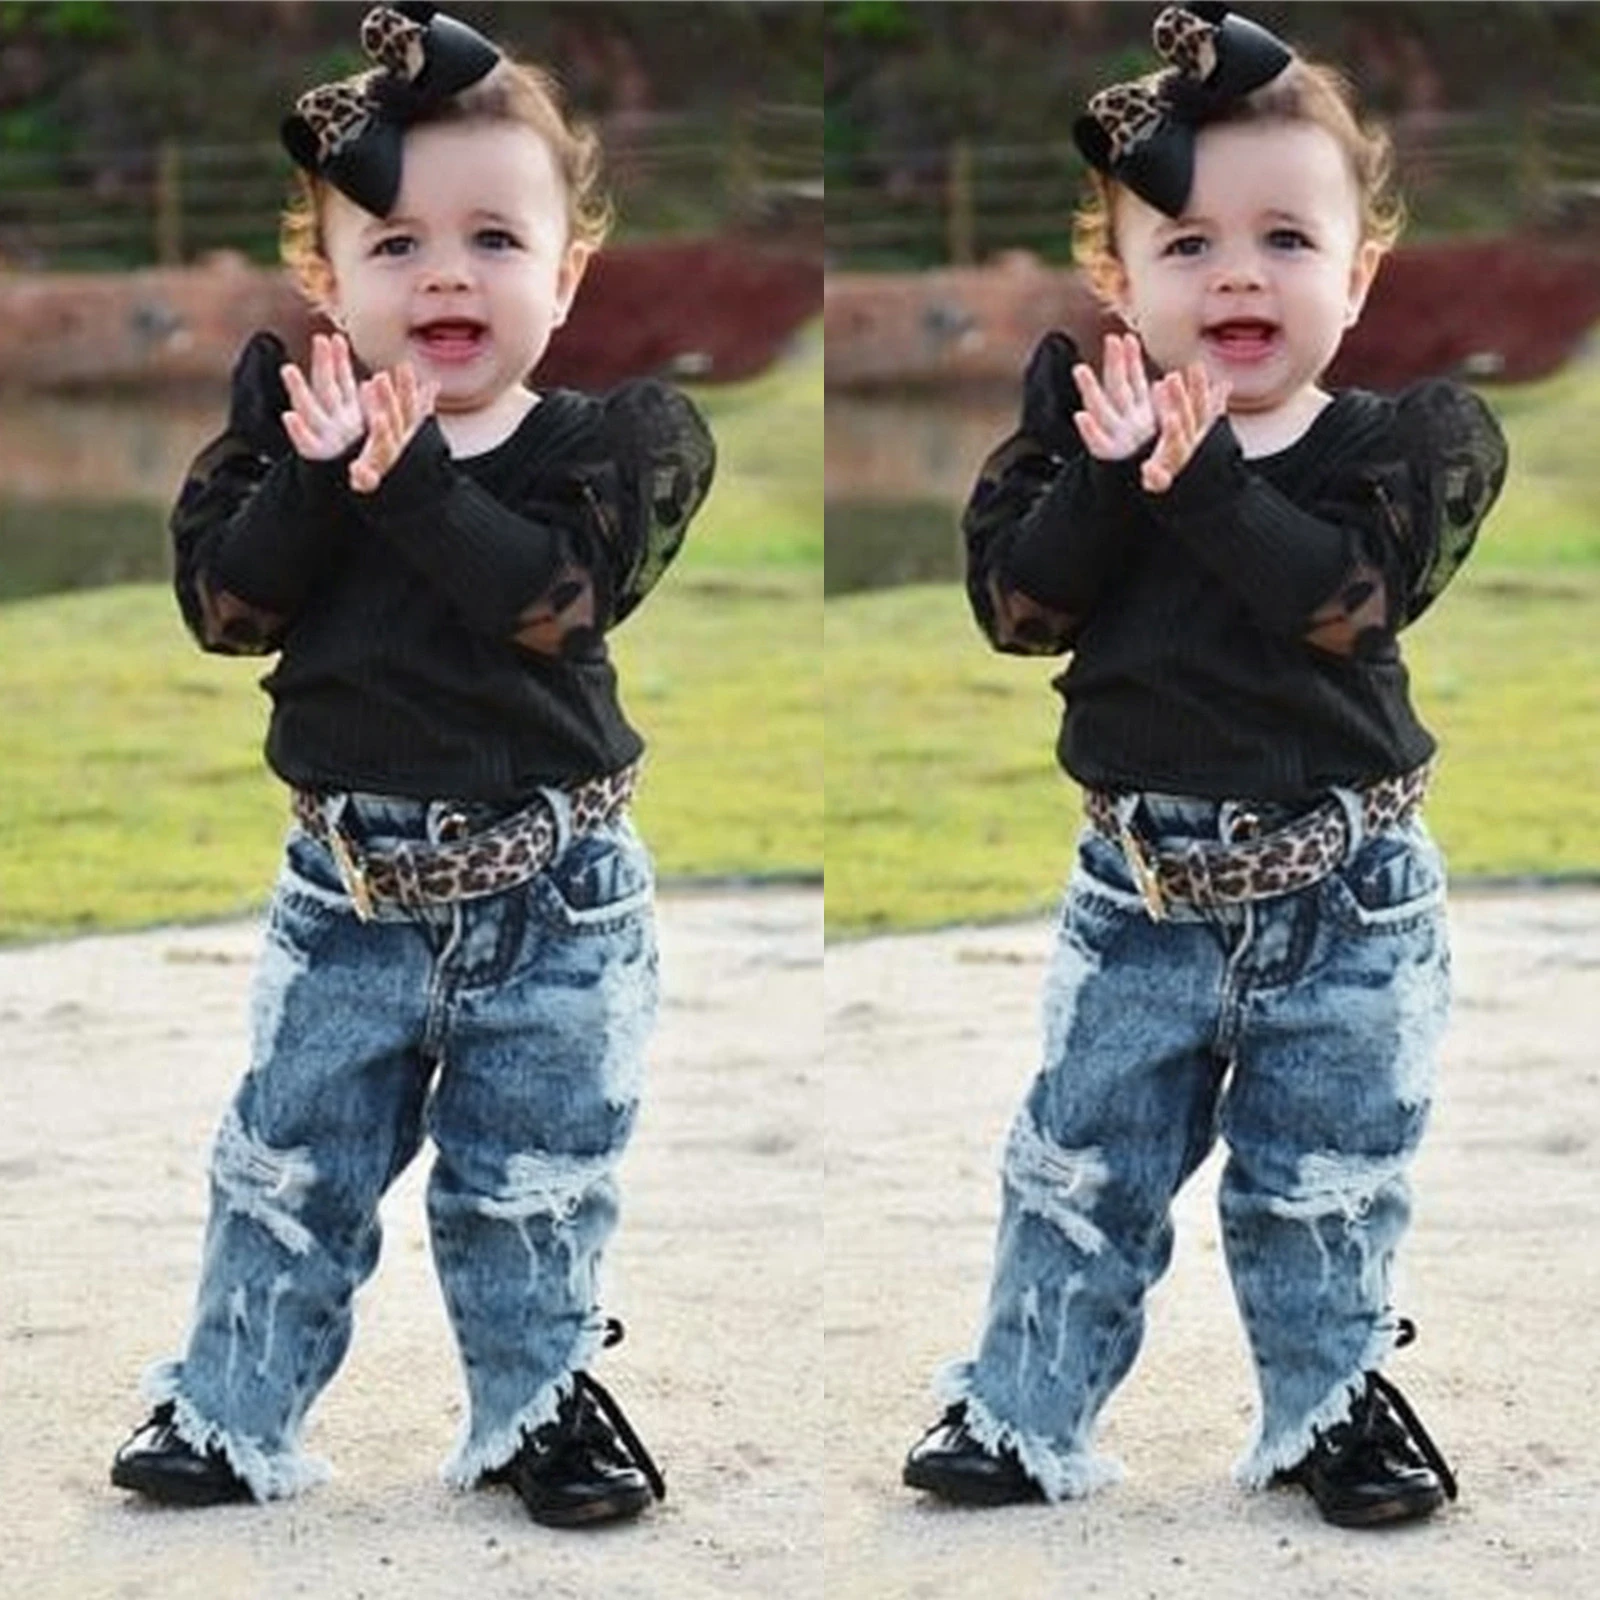 Denim pants Clothes Outfits 2pcs Fashion lovely Kids Baby Girls Toddler tops